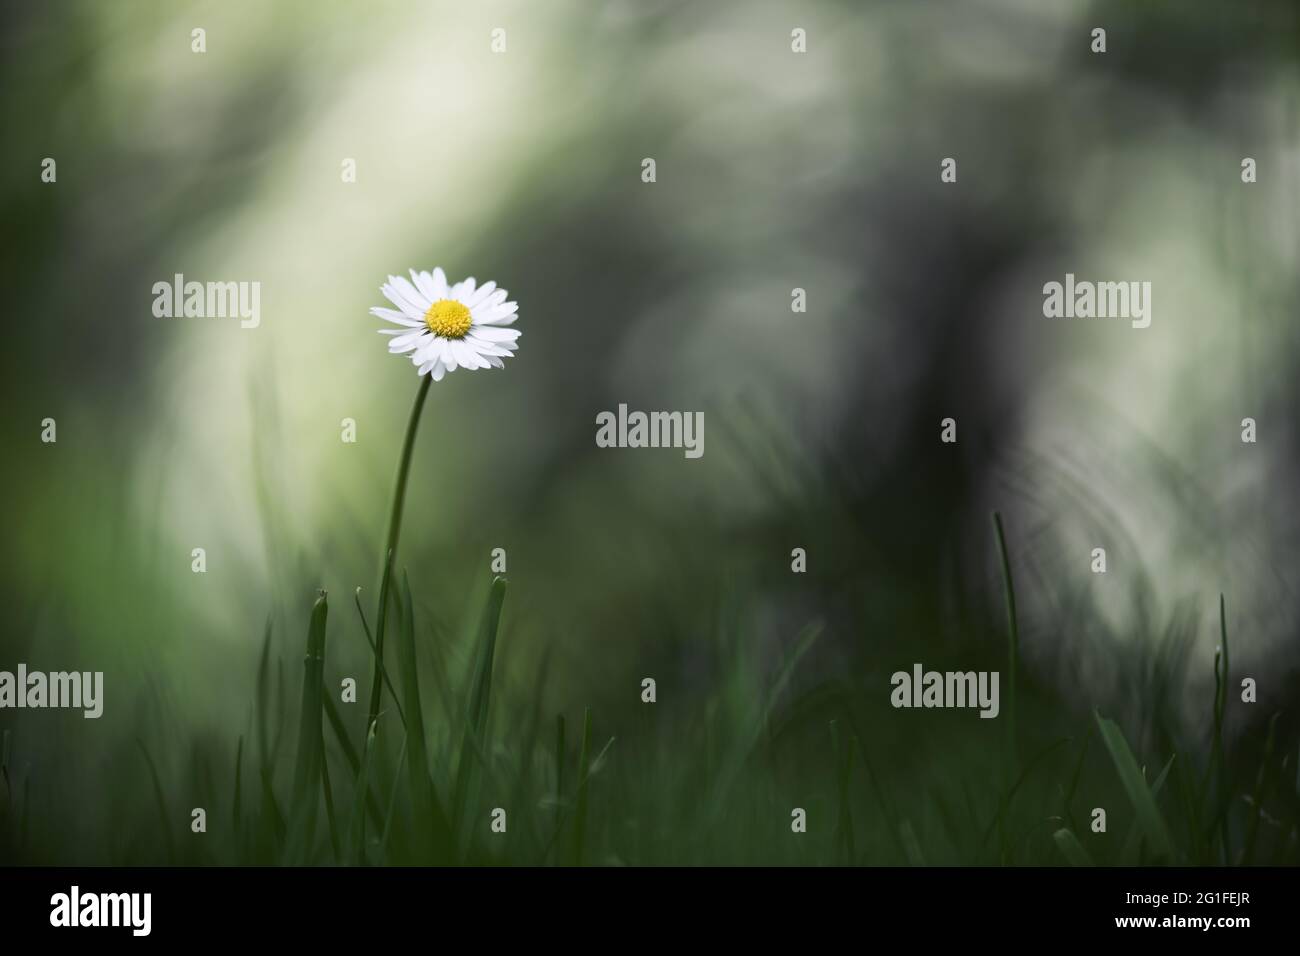 Closeup nature view of green creative layout made of green grass and single daisy flower on spring meadow. Natural background Stock Photo